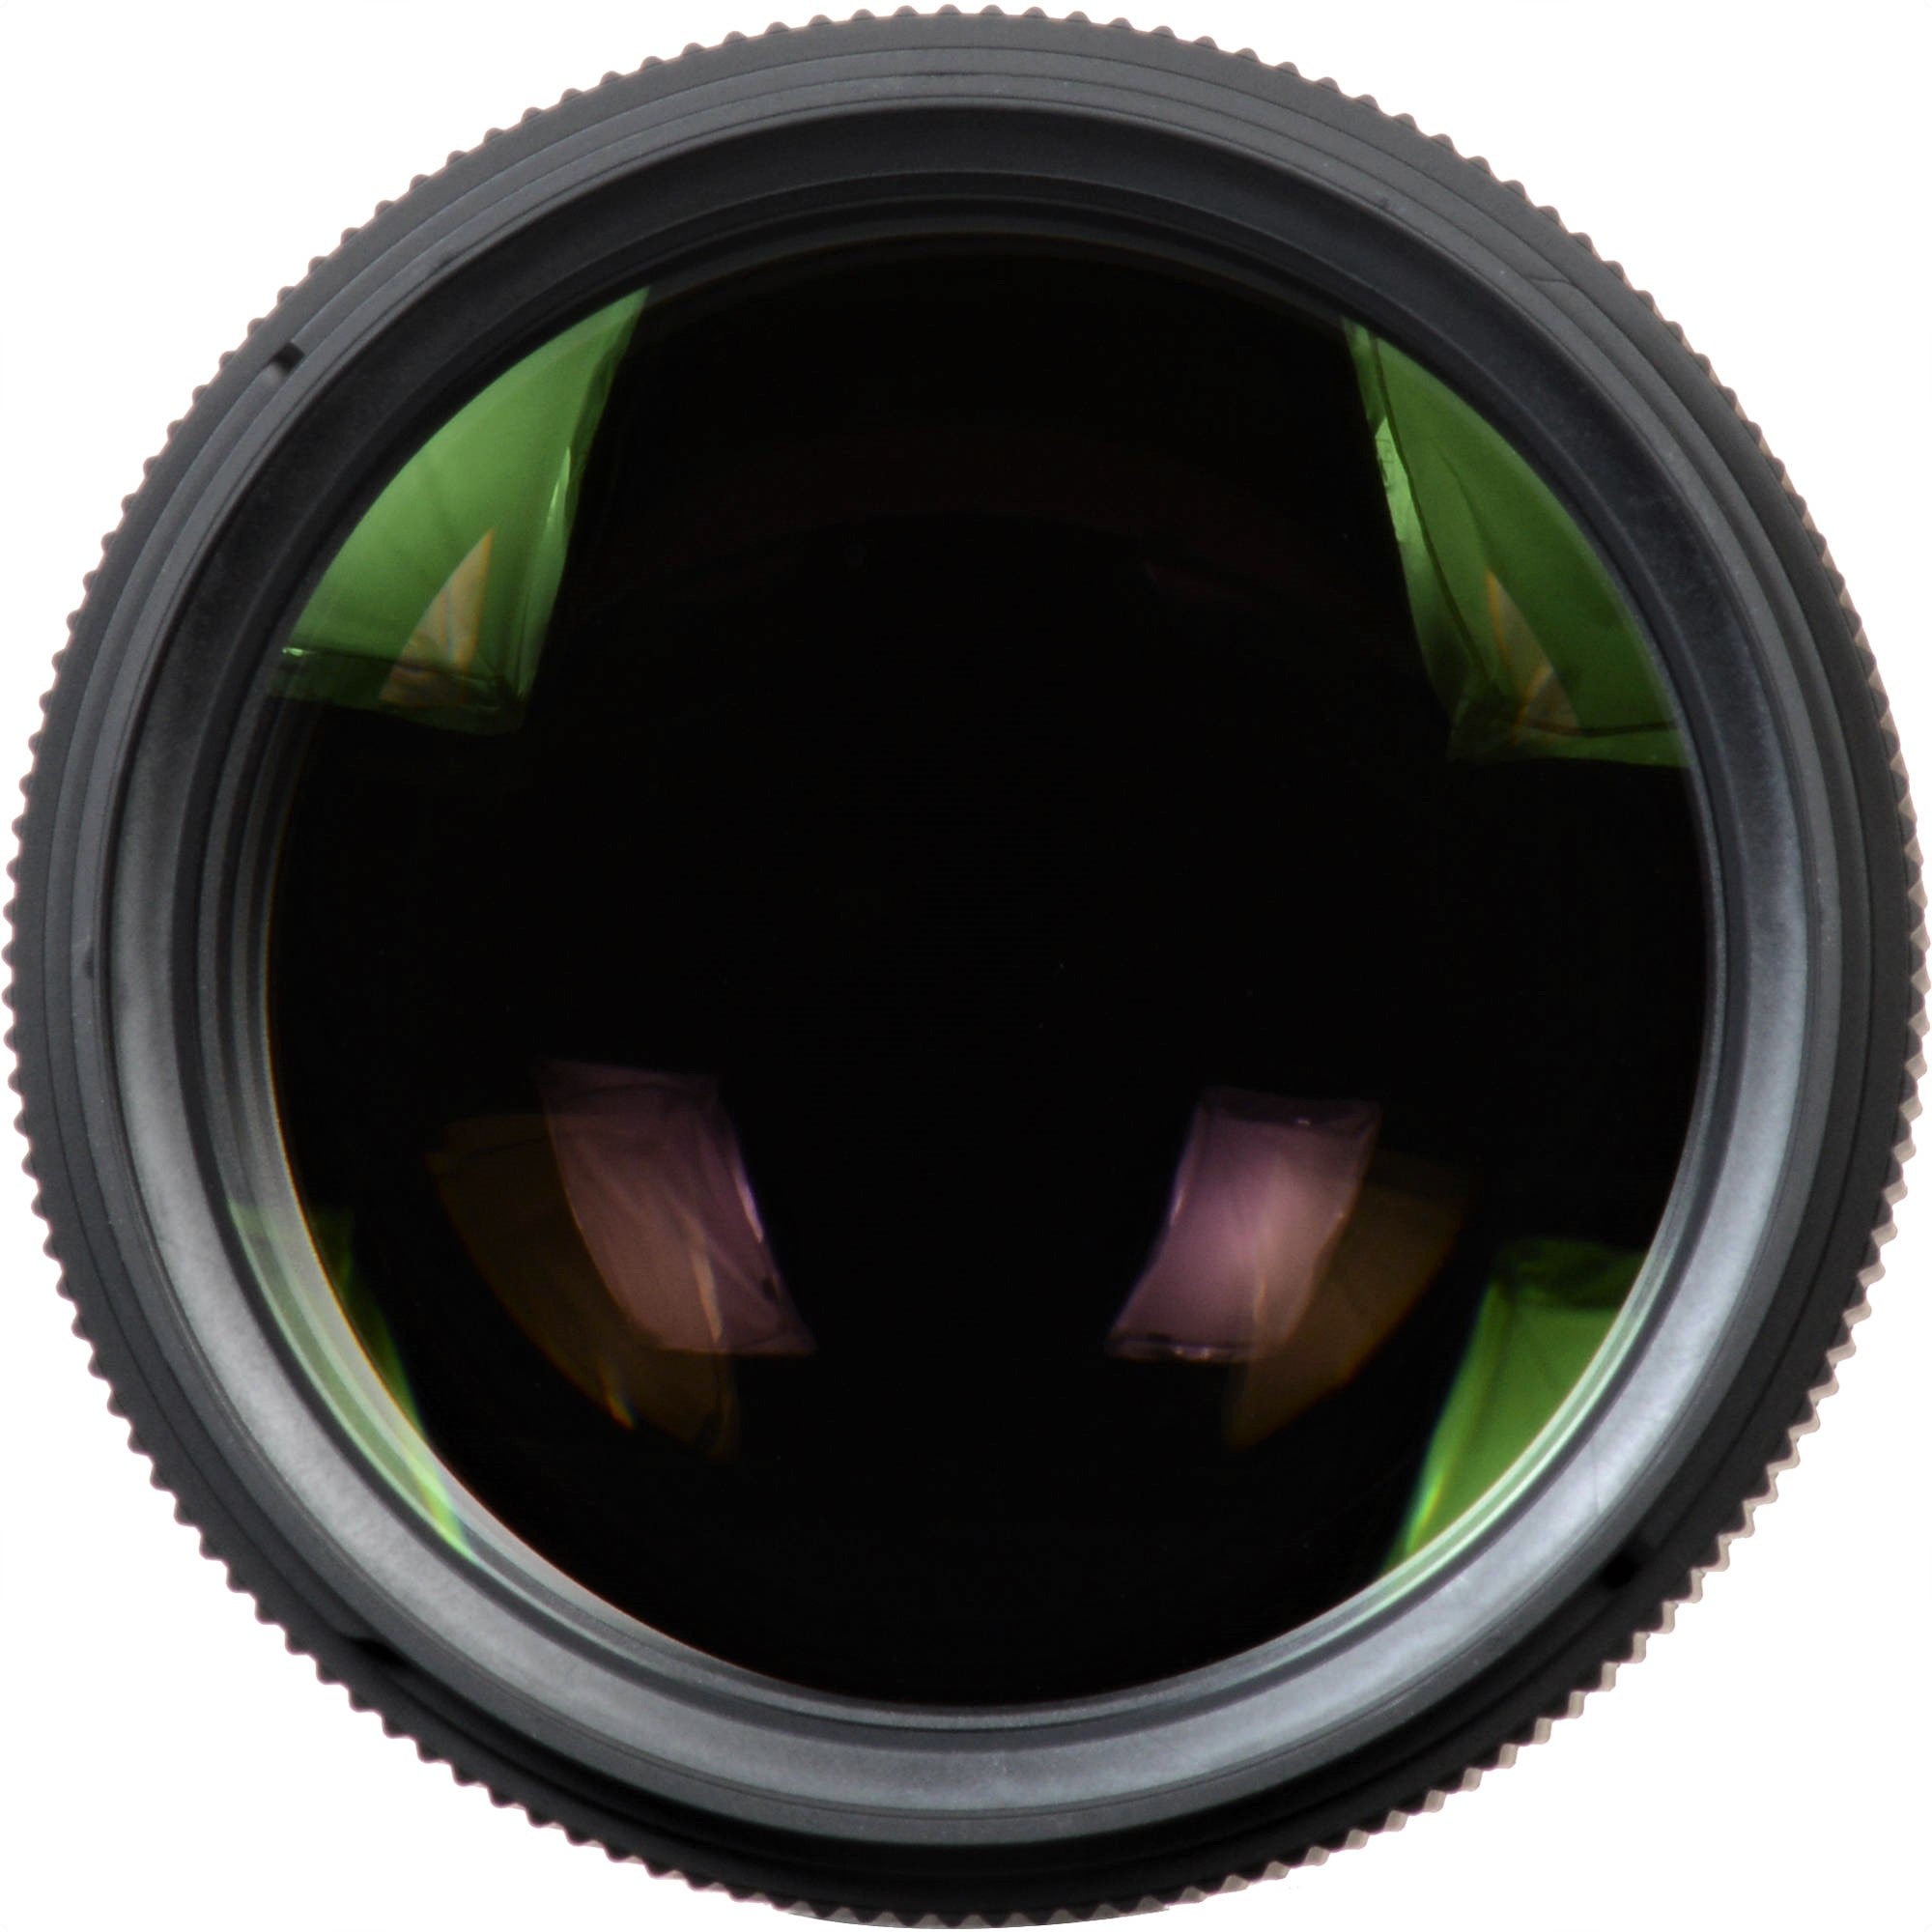 Sigma 135mm F1.8 DG HSM Art Lens for Leica L in a Front Close-Up View